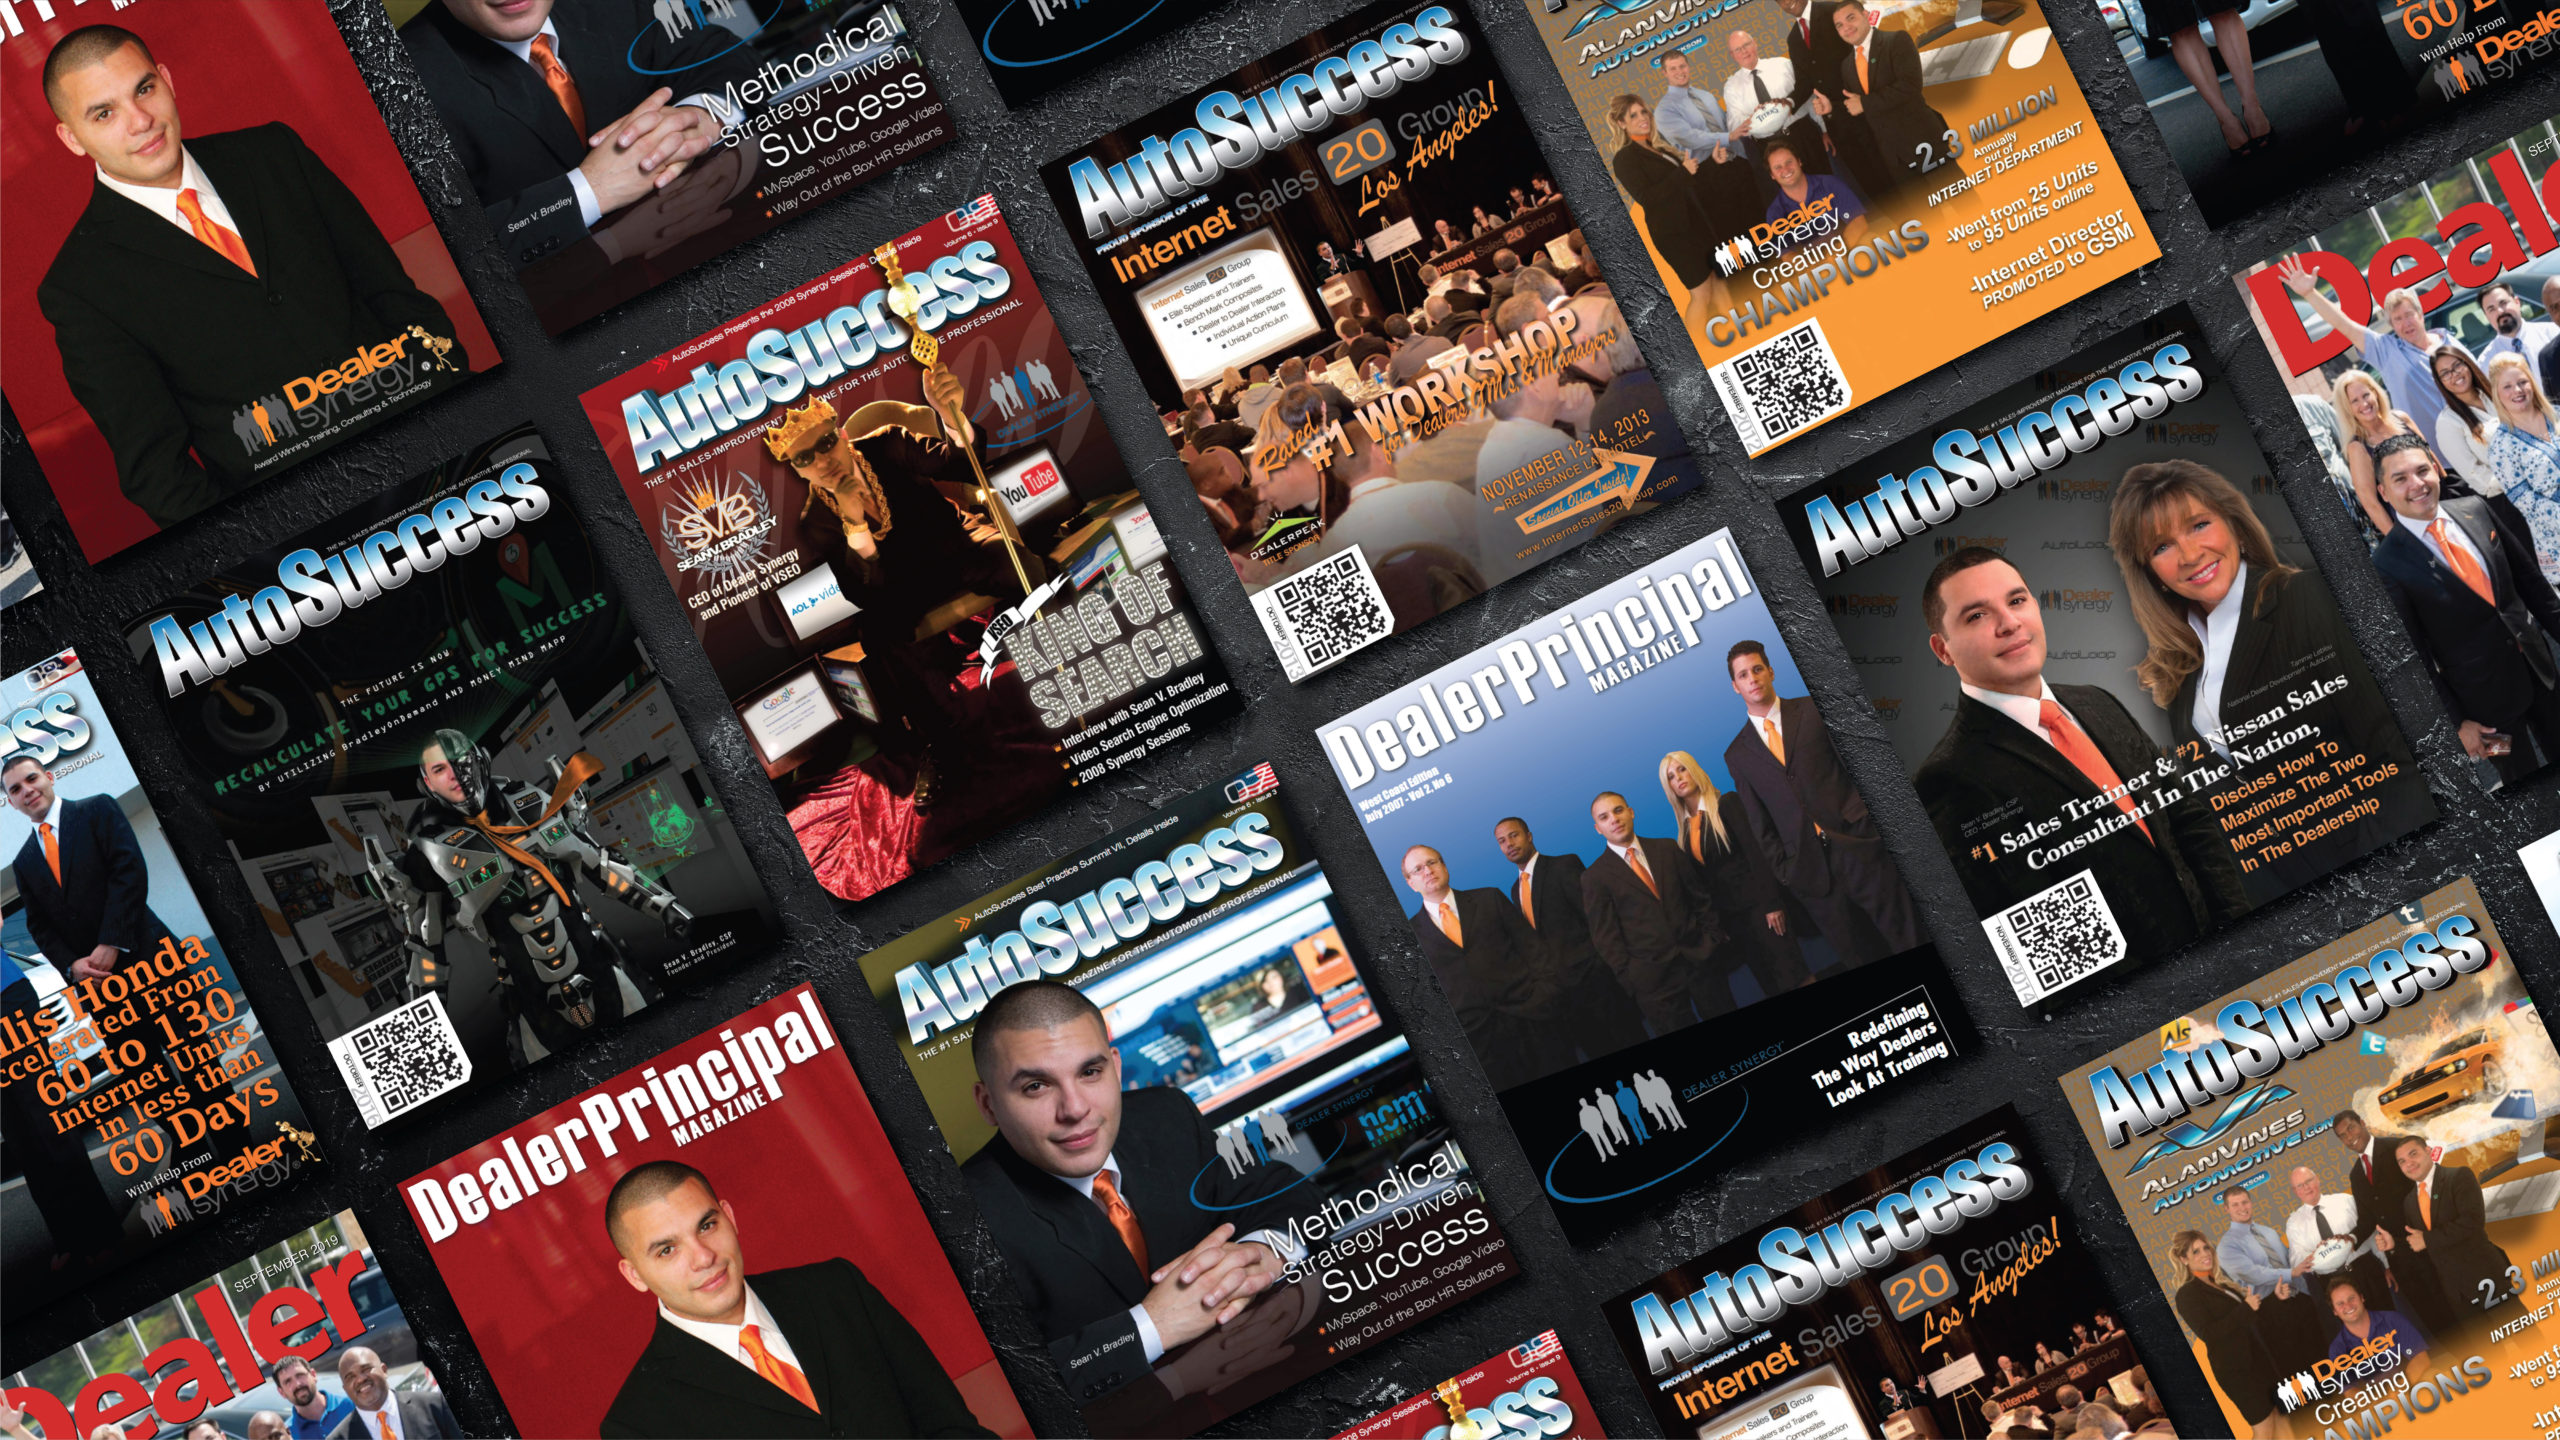 Sean V. Bradley has made the covers of multiple magazine covers for his car sales training programs.